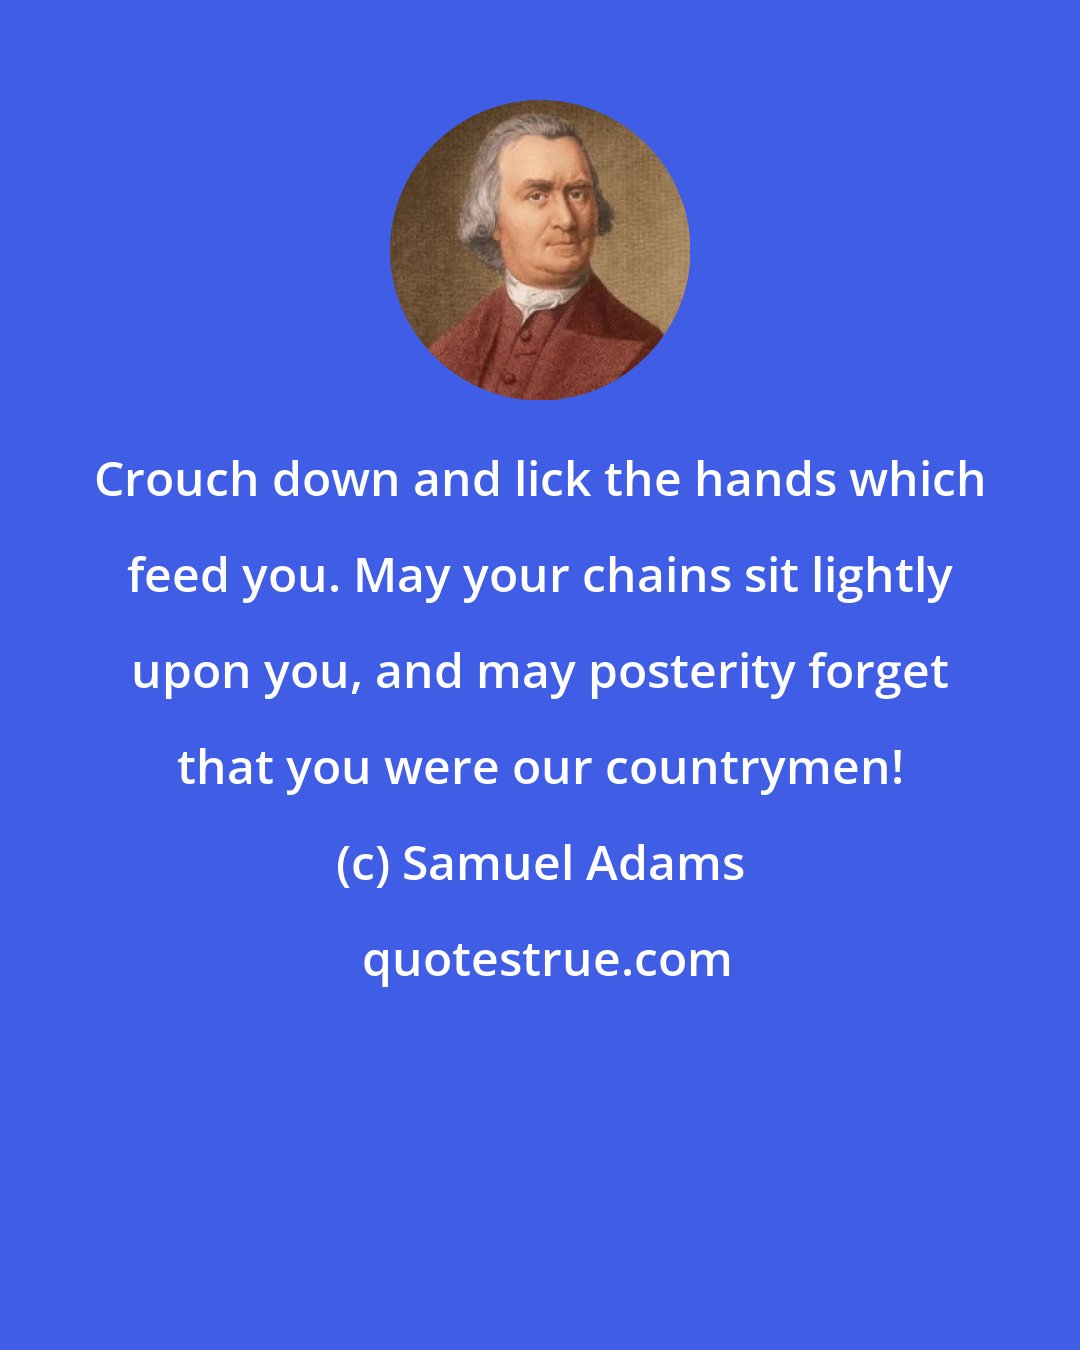 Samuel Adams: Crouch down and lick the hands which feed you. May your chains sit lightly upon you, and may posterity forget that you were our countrymen!